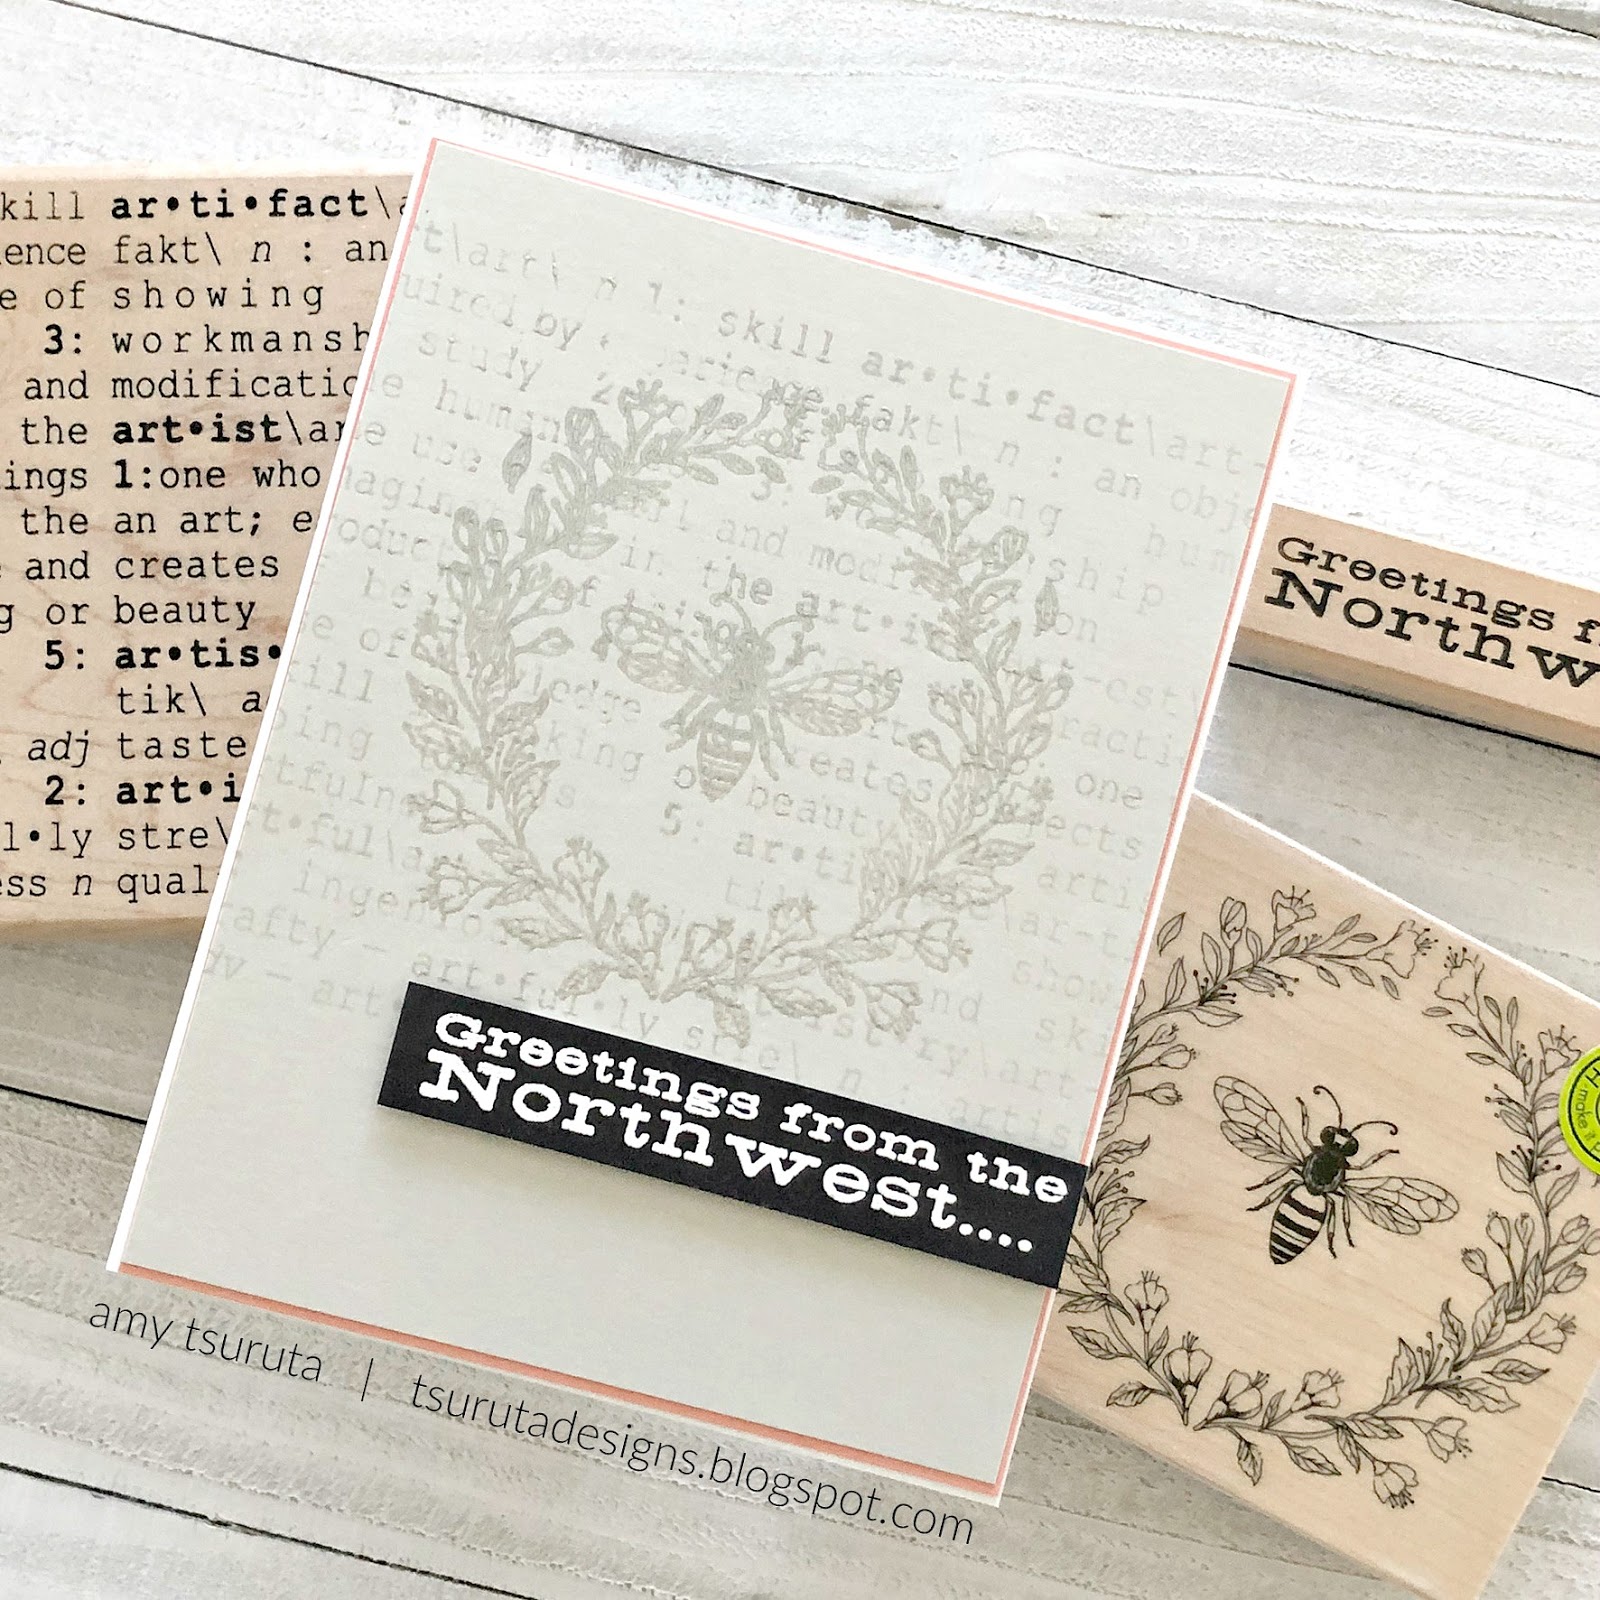 Hero Arts Rubber Stamps Antique Bee and Flowers K6224